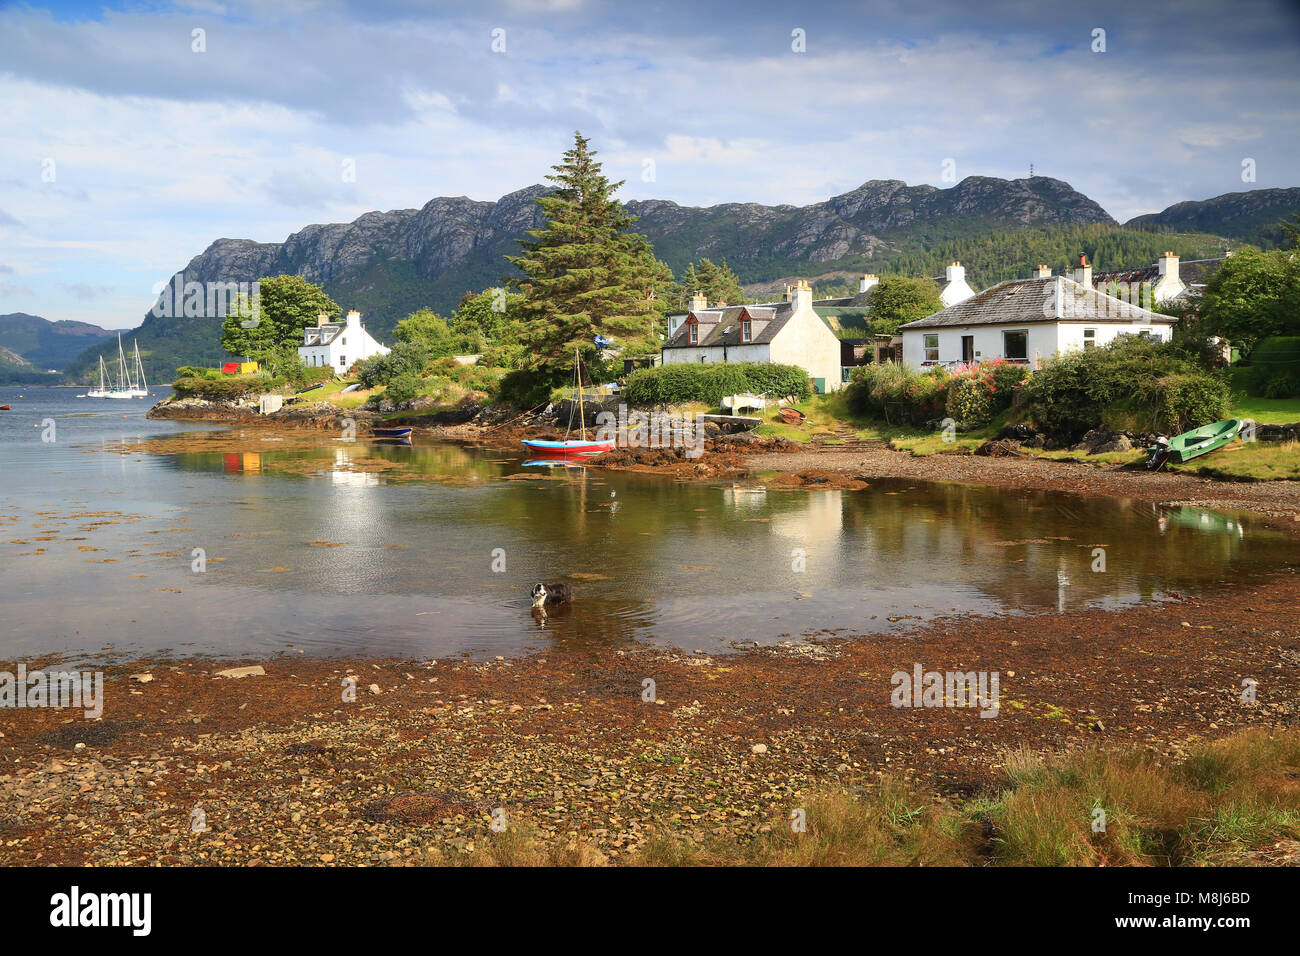 Plockton is a small pretty village, which sits on a sheltered bay with stunning views overlooking Loch Carron, in the Highlands of Scotland. Stock Photo